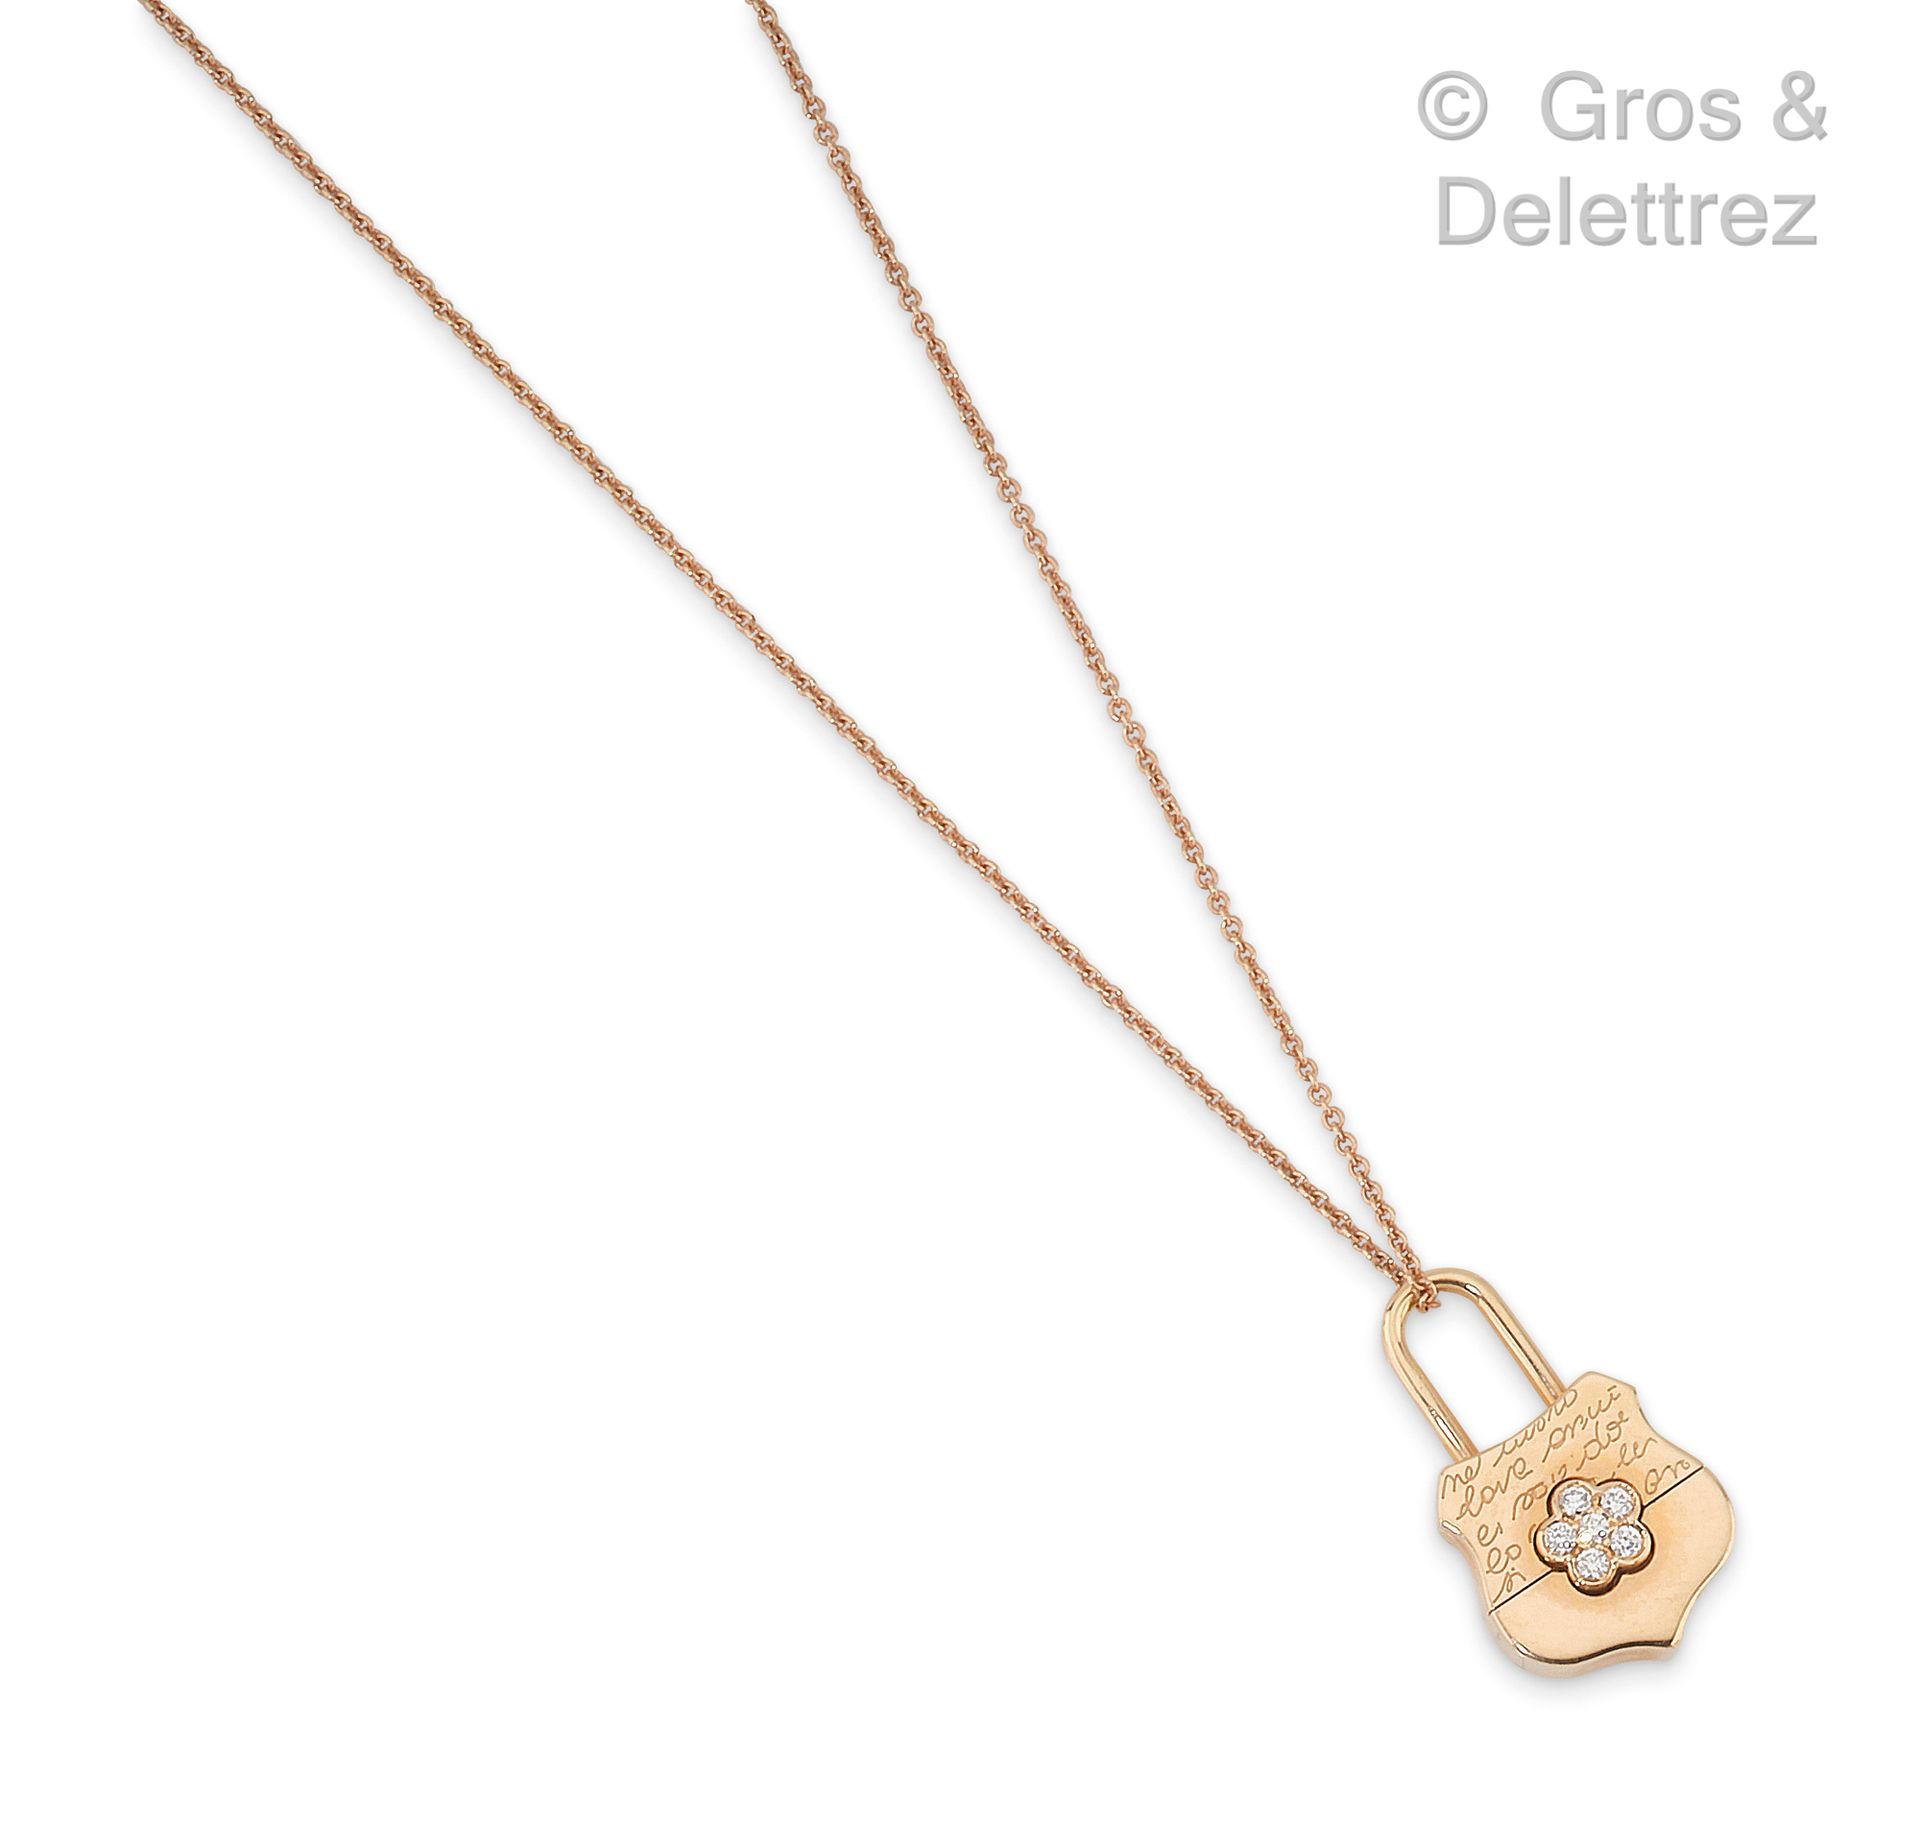 Null Chain and pendant "Padlock" in pink gold, decorated with a flower formed by&hellip;